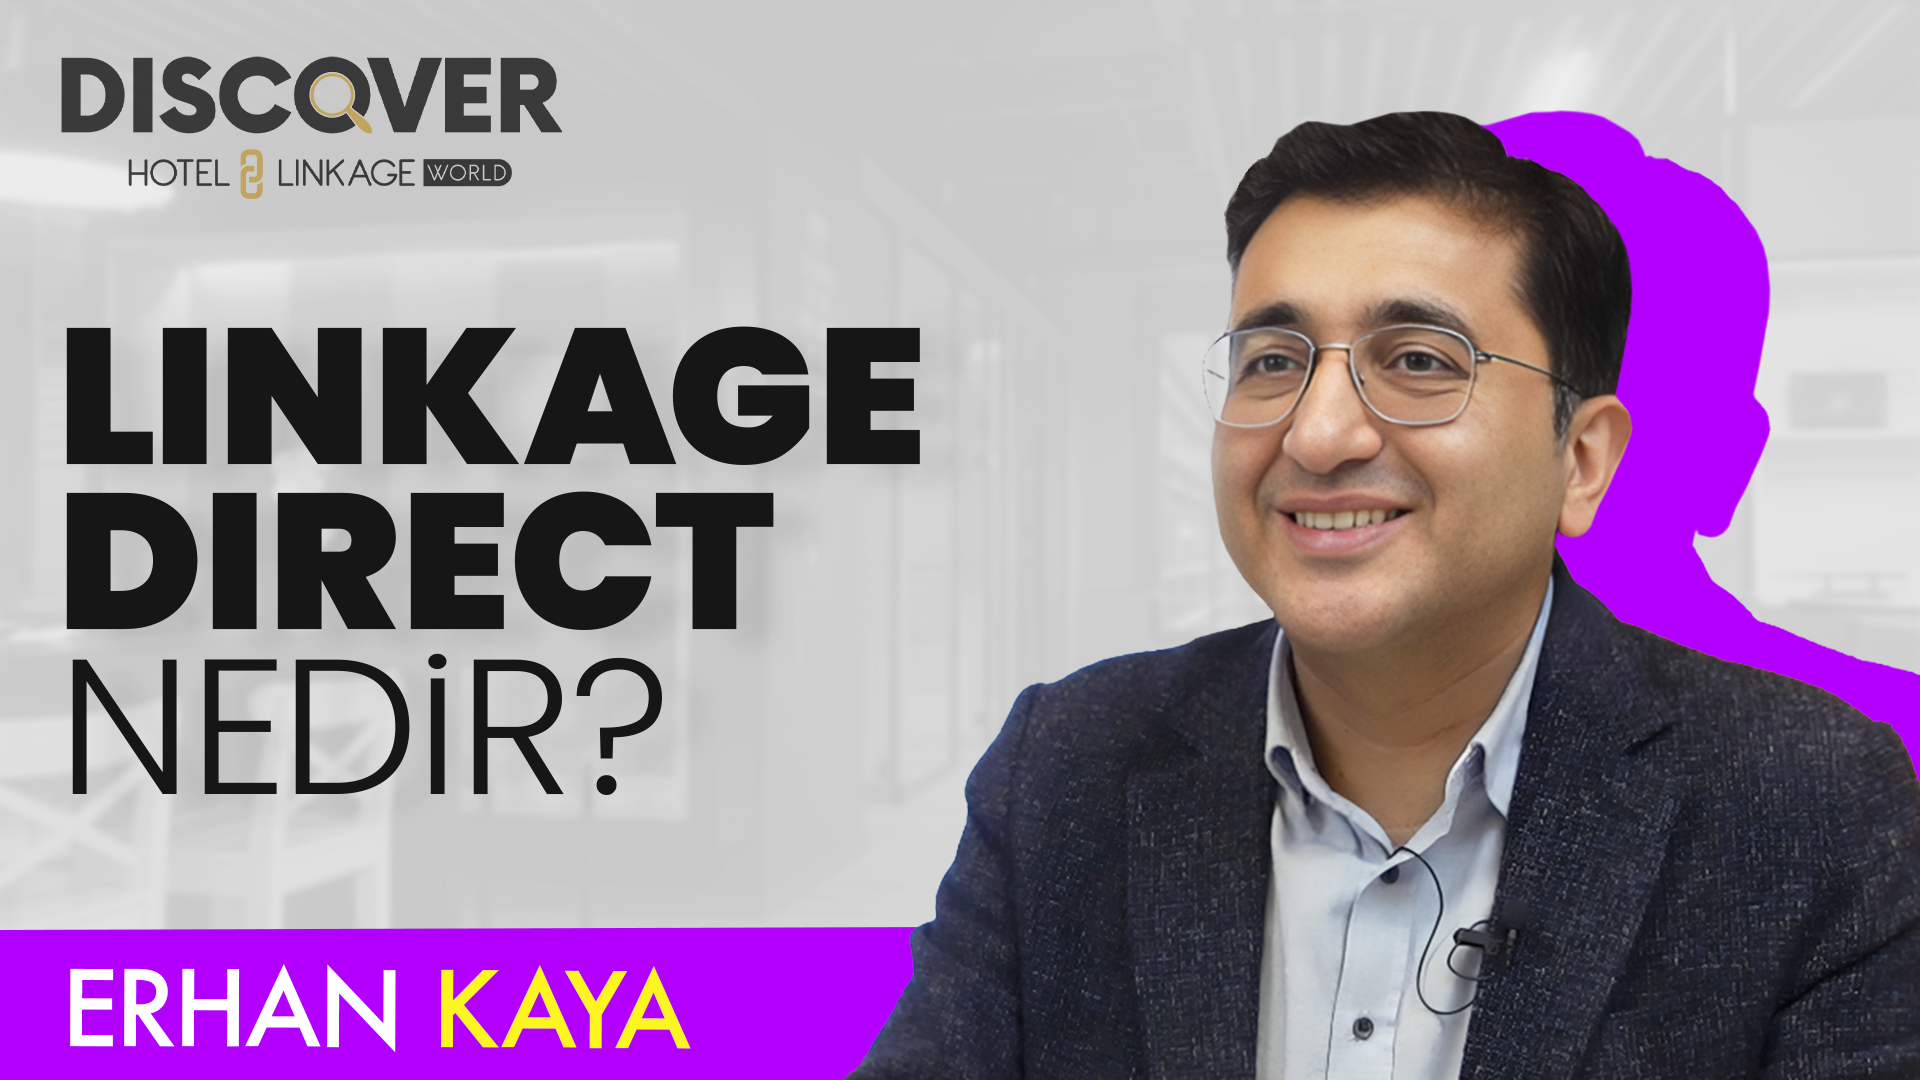 Erhan Kaya, CEO of Hotel Linkage, smiling in a promotional image for the upcoming webinar titled 'Discover Linkage Direct' on January 24, 2024, focused on direct booking strategies for hotels to improve profitability and operations, with details on registration and QR code.